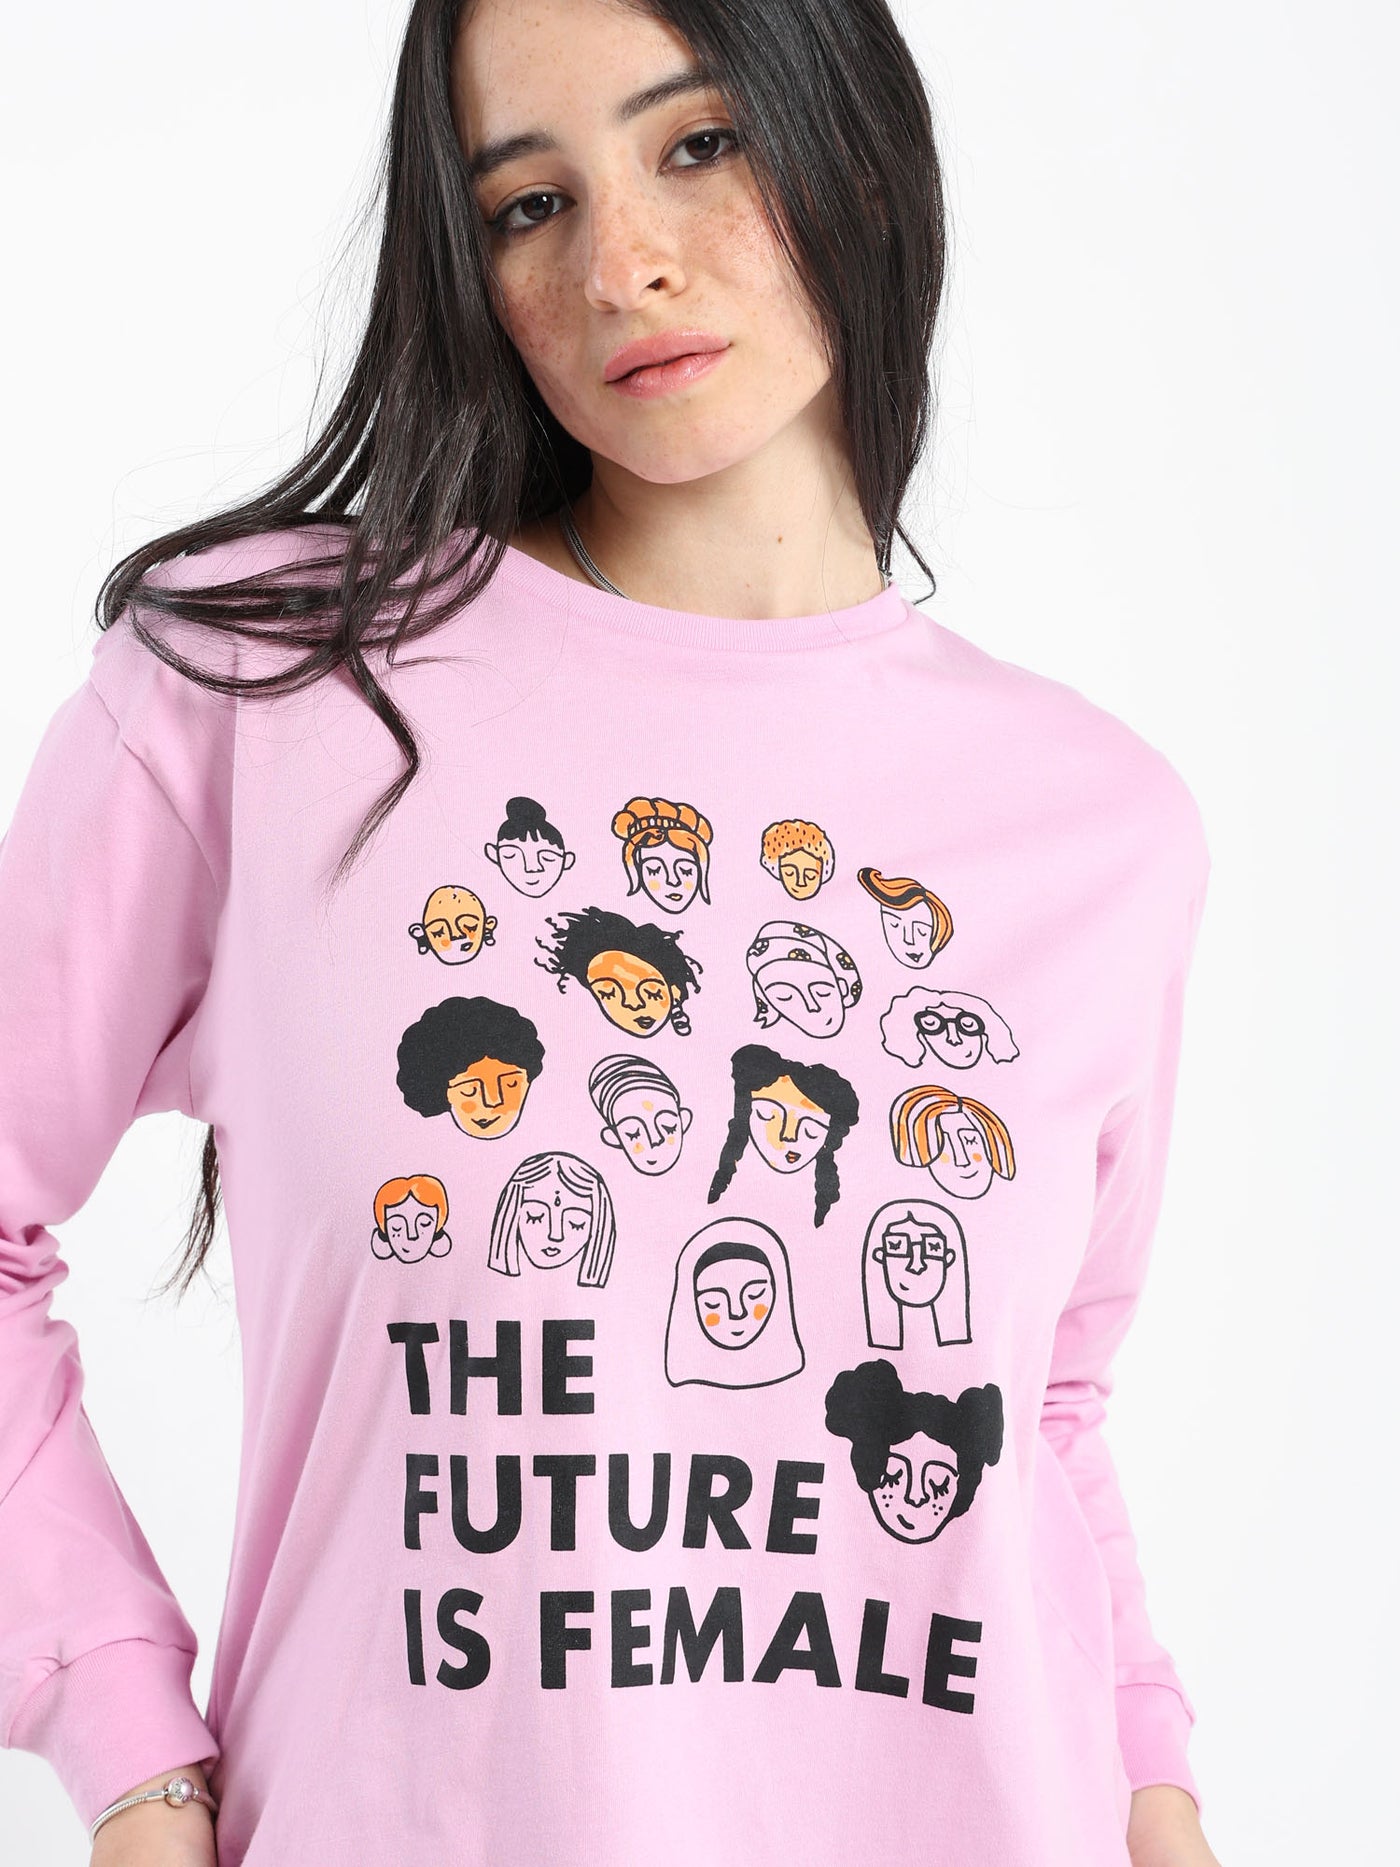 T-Shirt - "The Future Is Female" Print - Long Sleeves